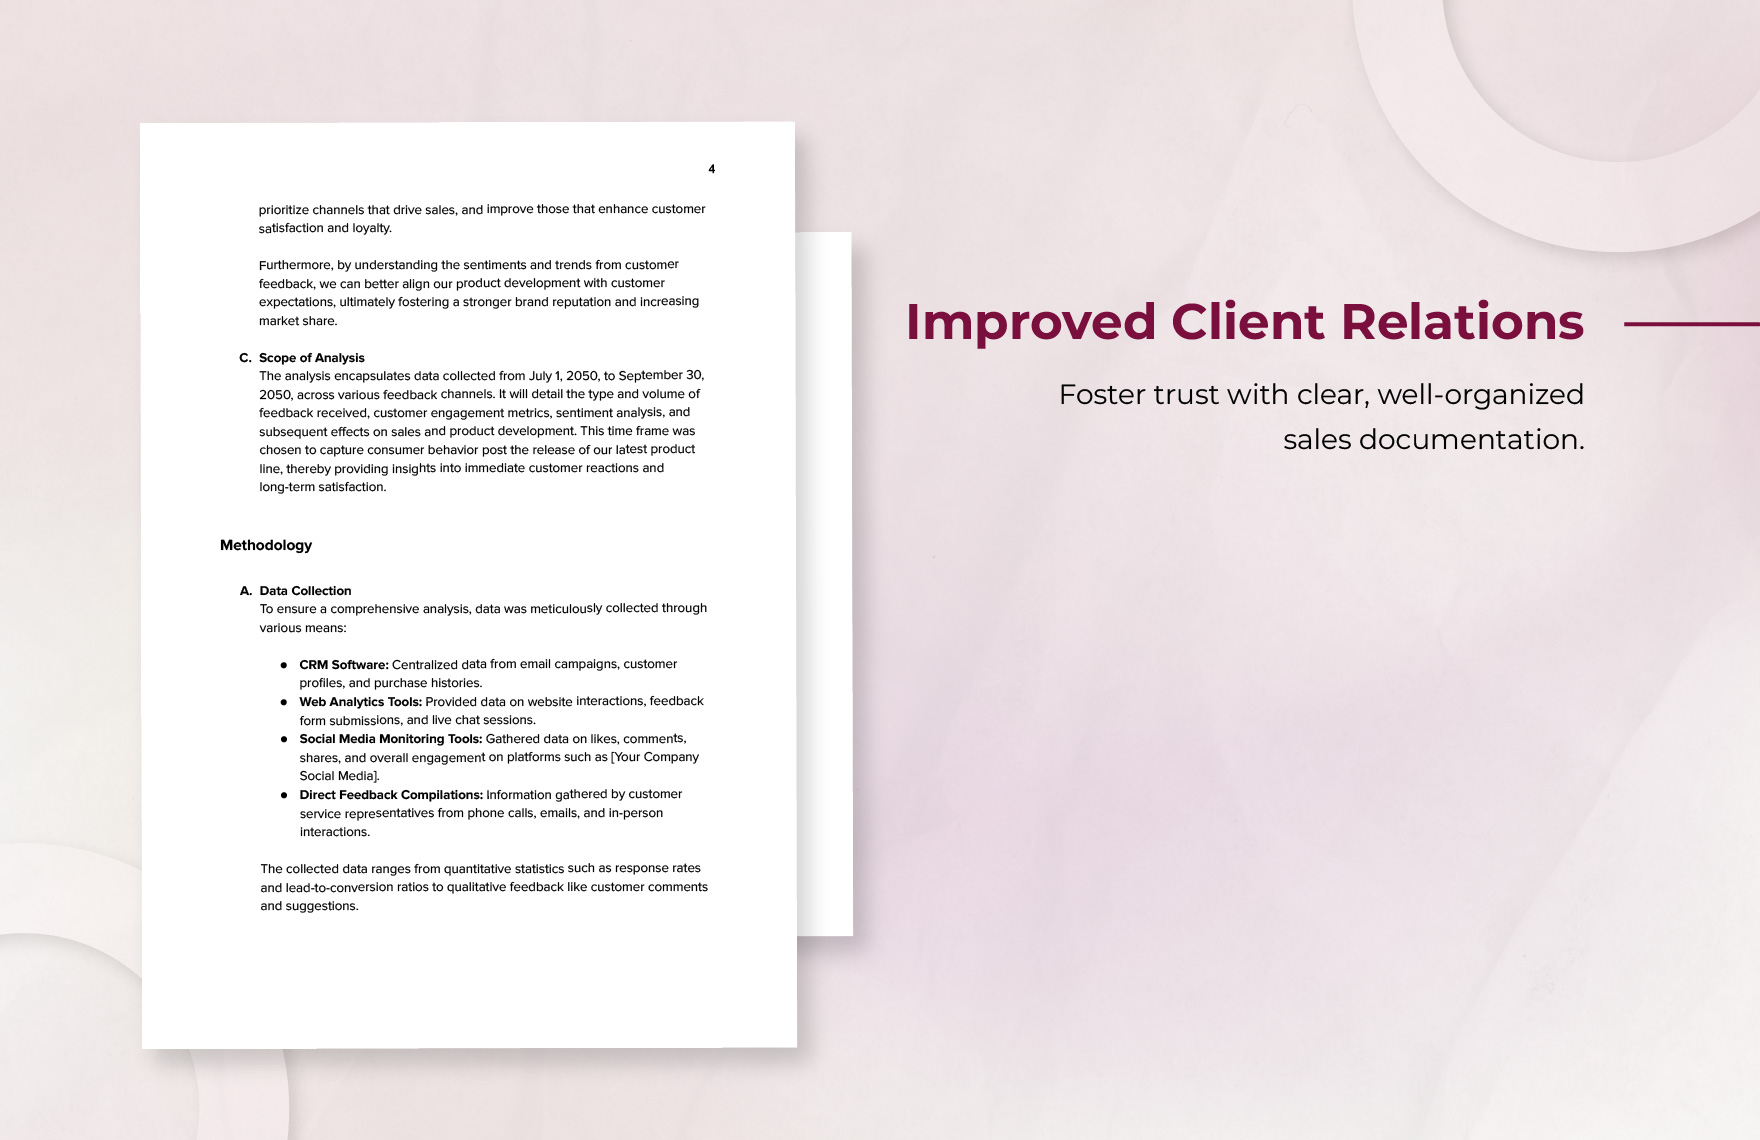 Sales Analysis of Customer Feedback Channels Template